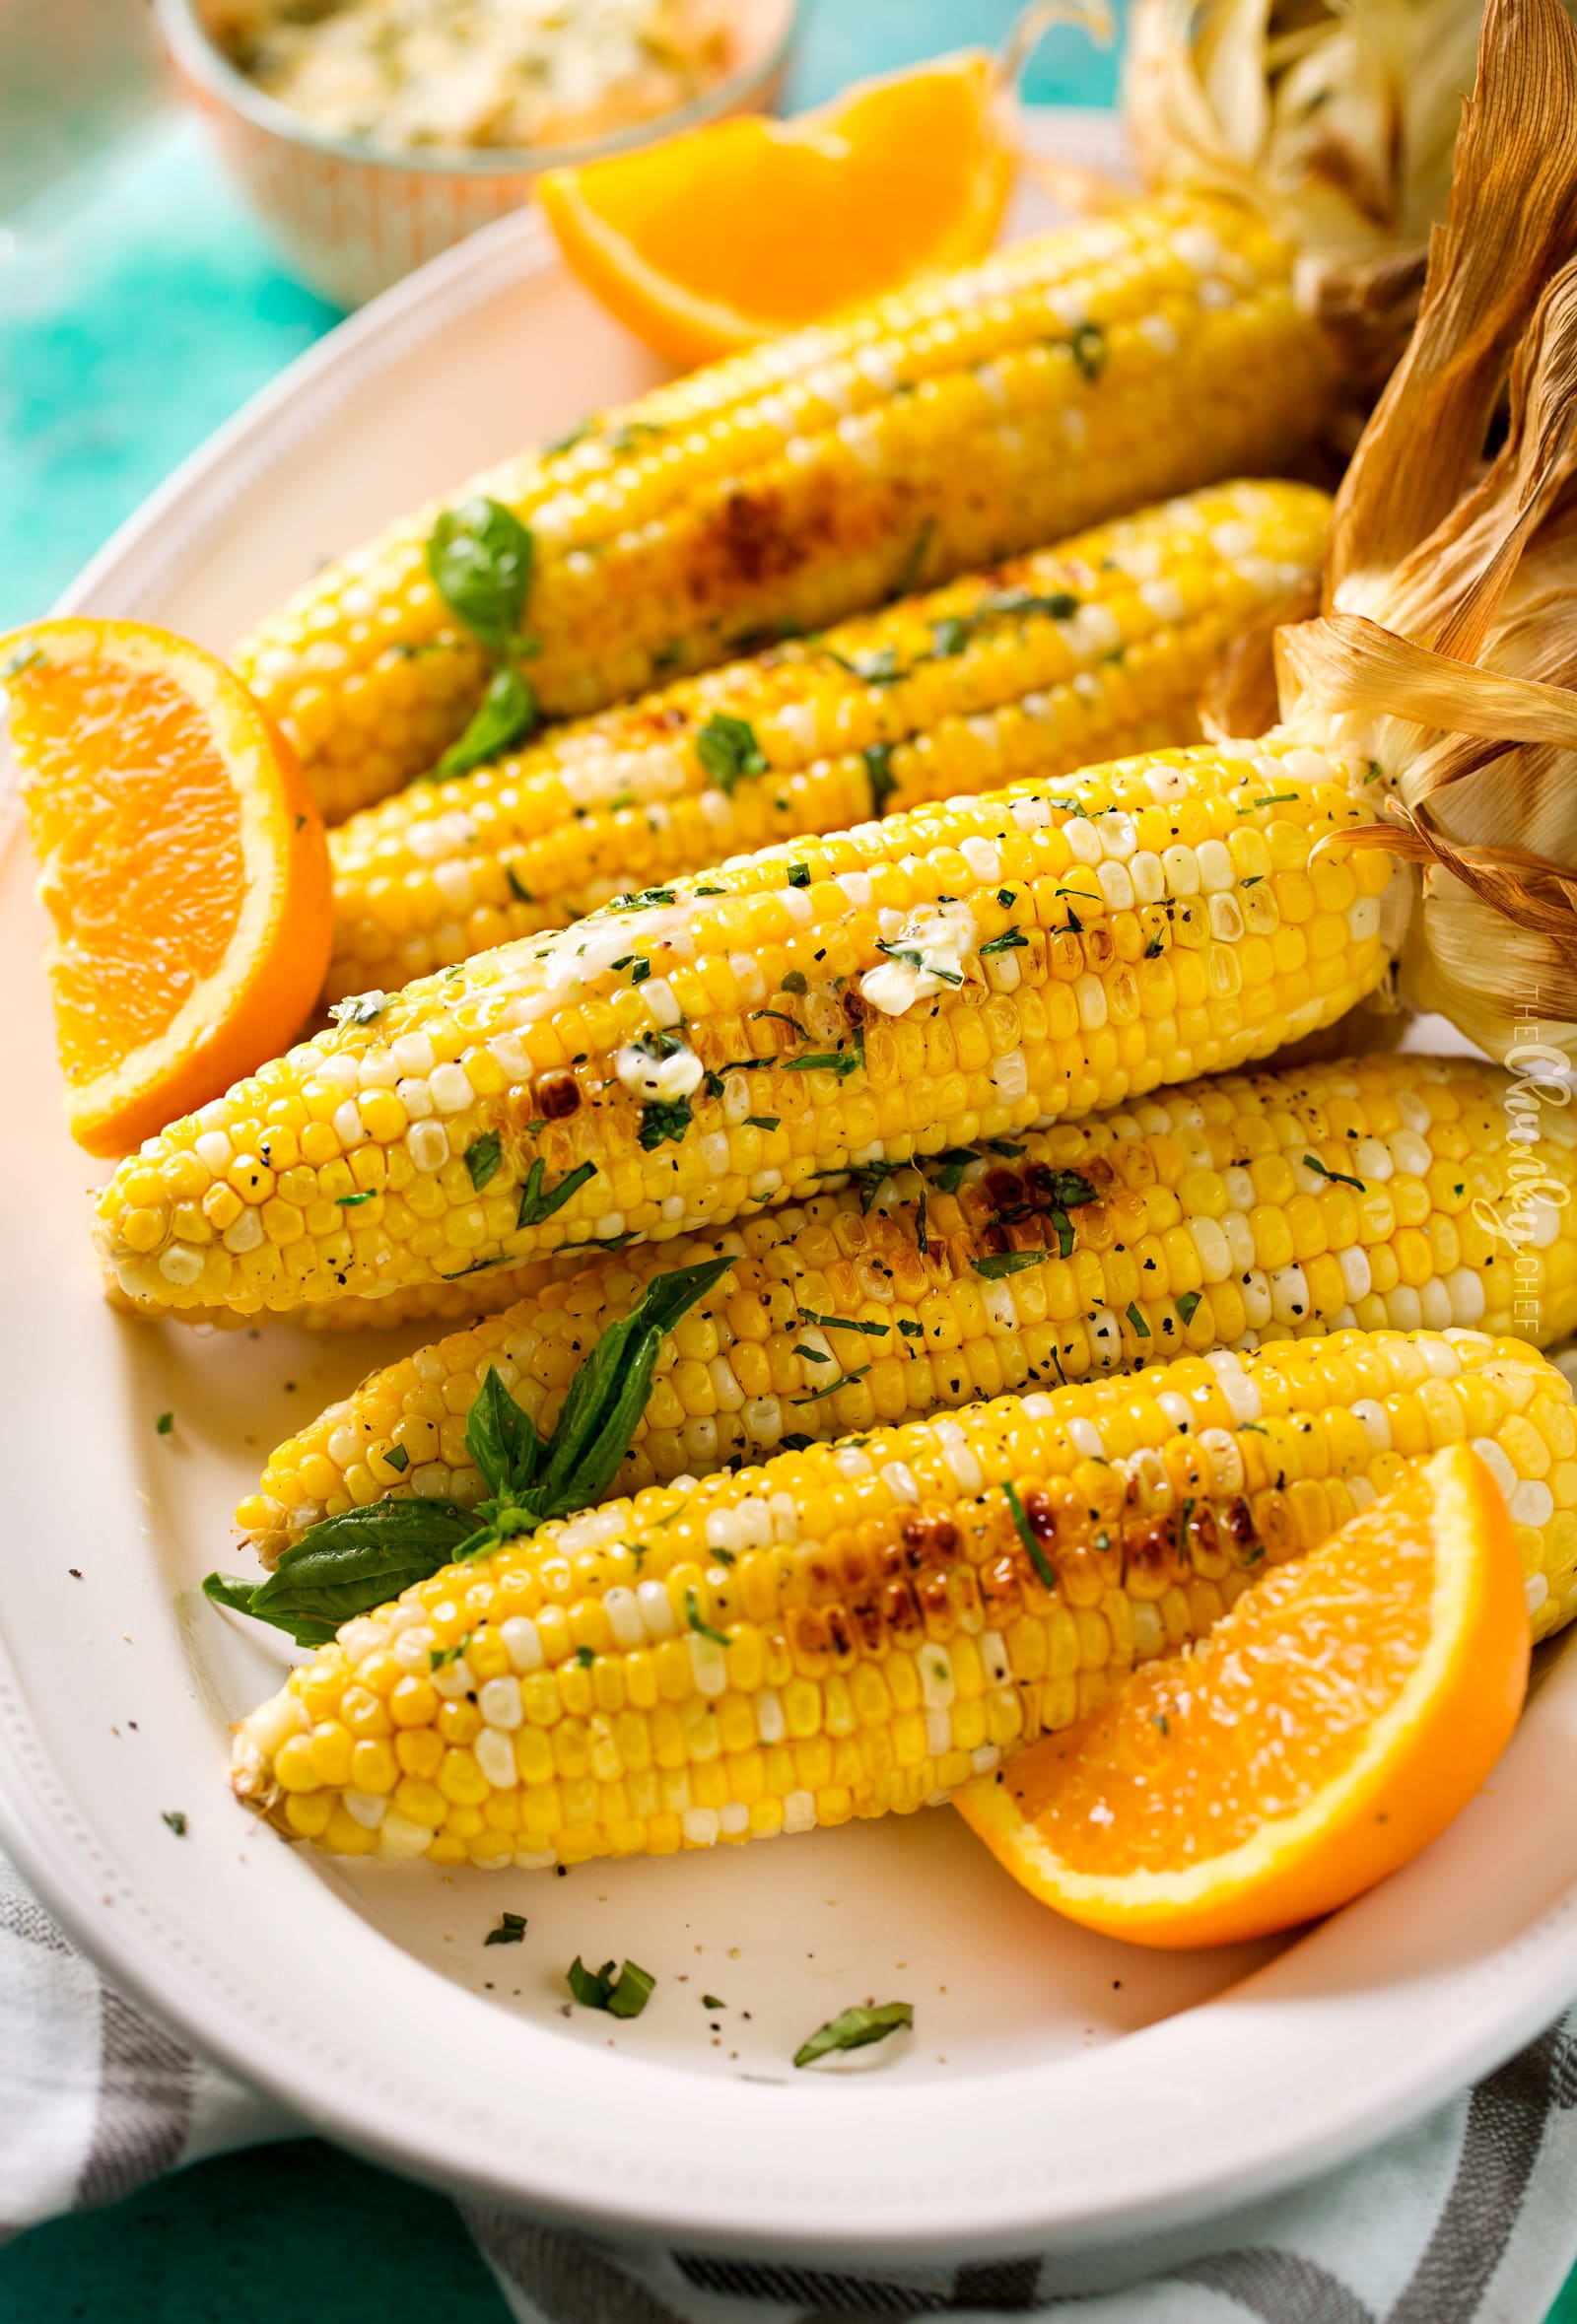 Oven Roasted Corn on the Cob | This foolproof method for cooking corn on the cob is easy, perfect for any kind of weather, and produces the juiciest, perfectly cooked ears of corn ever! | http://thechunkychef.com